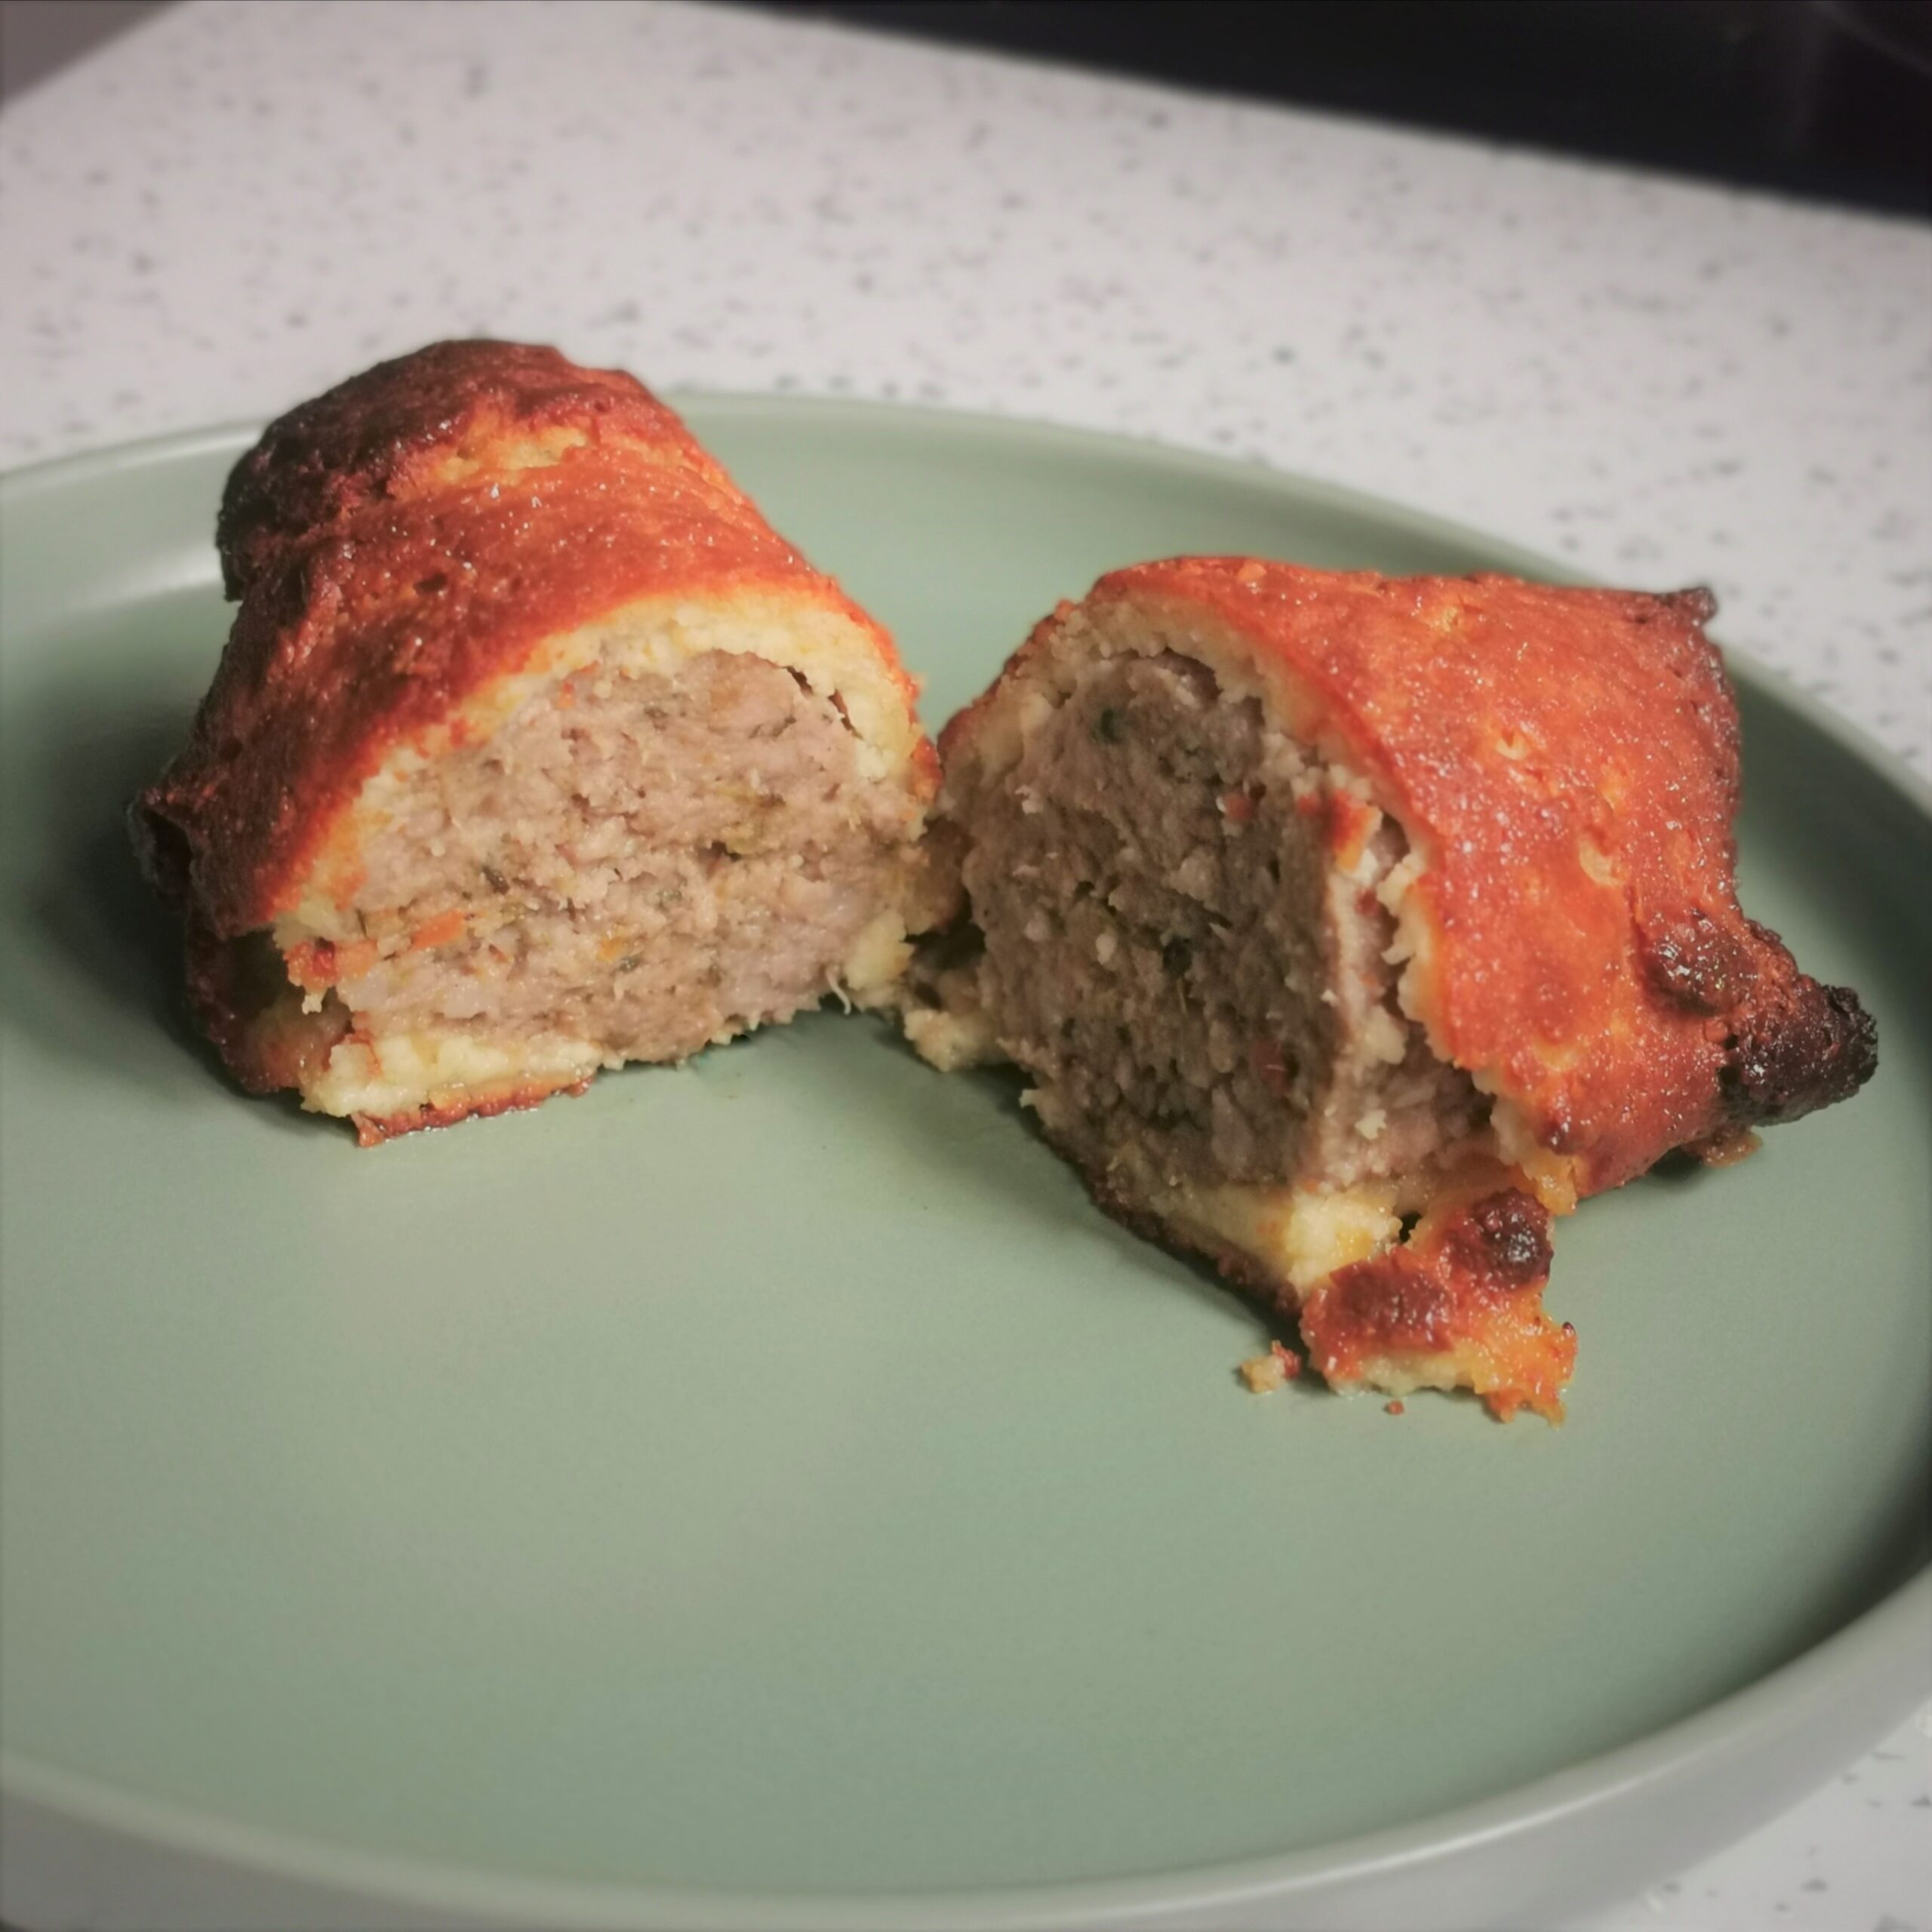 a low carb sausage roll cut in half on a green plate with a white kitchen surface